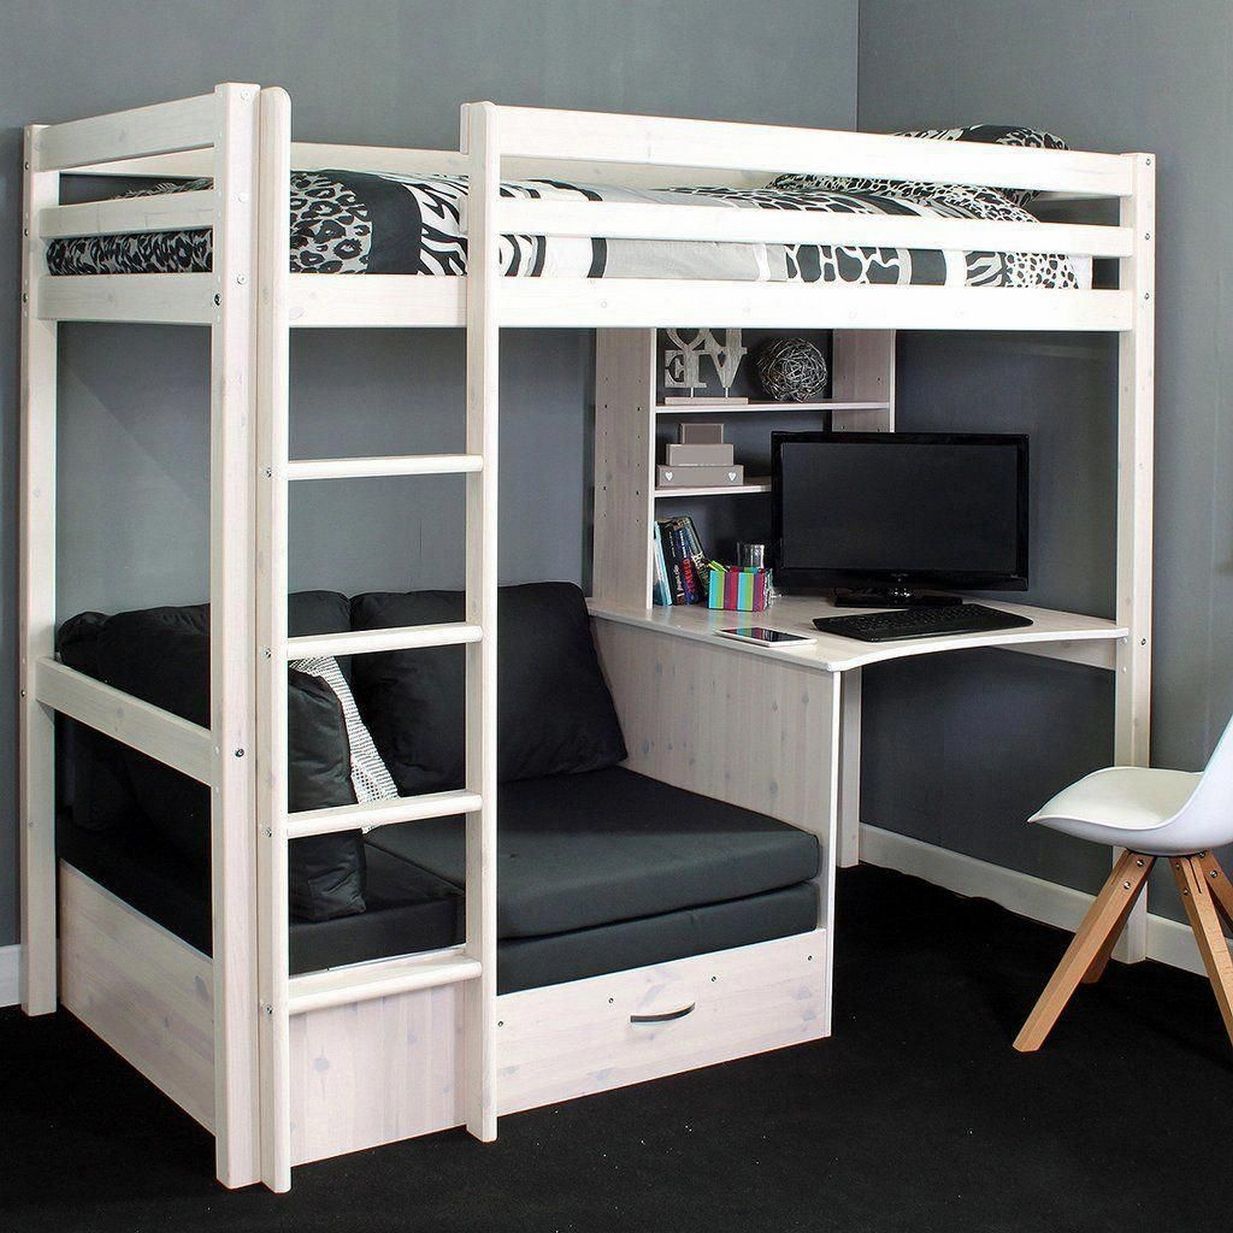 Buy loft beds with desk for your kid’s
room to save space in a small room